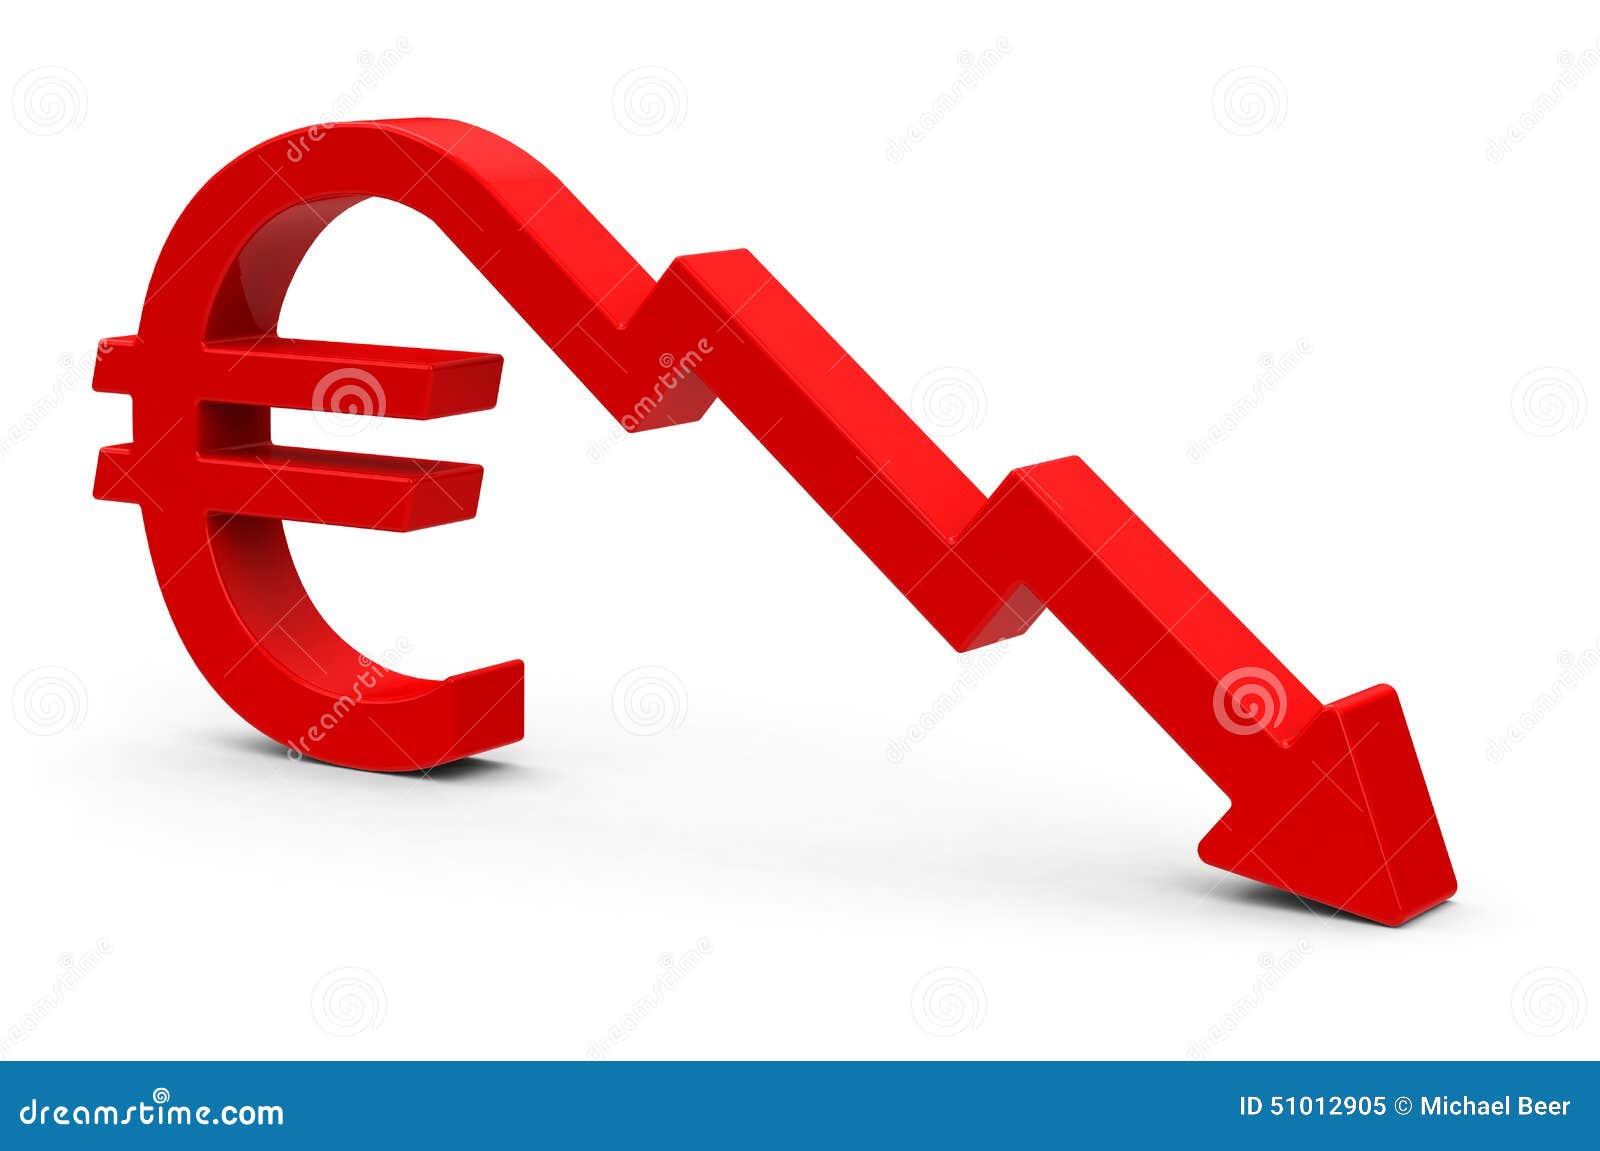 The Euro in Crisis: Decision Time at the European Central Bank